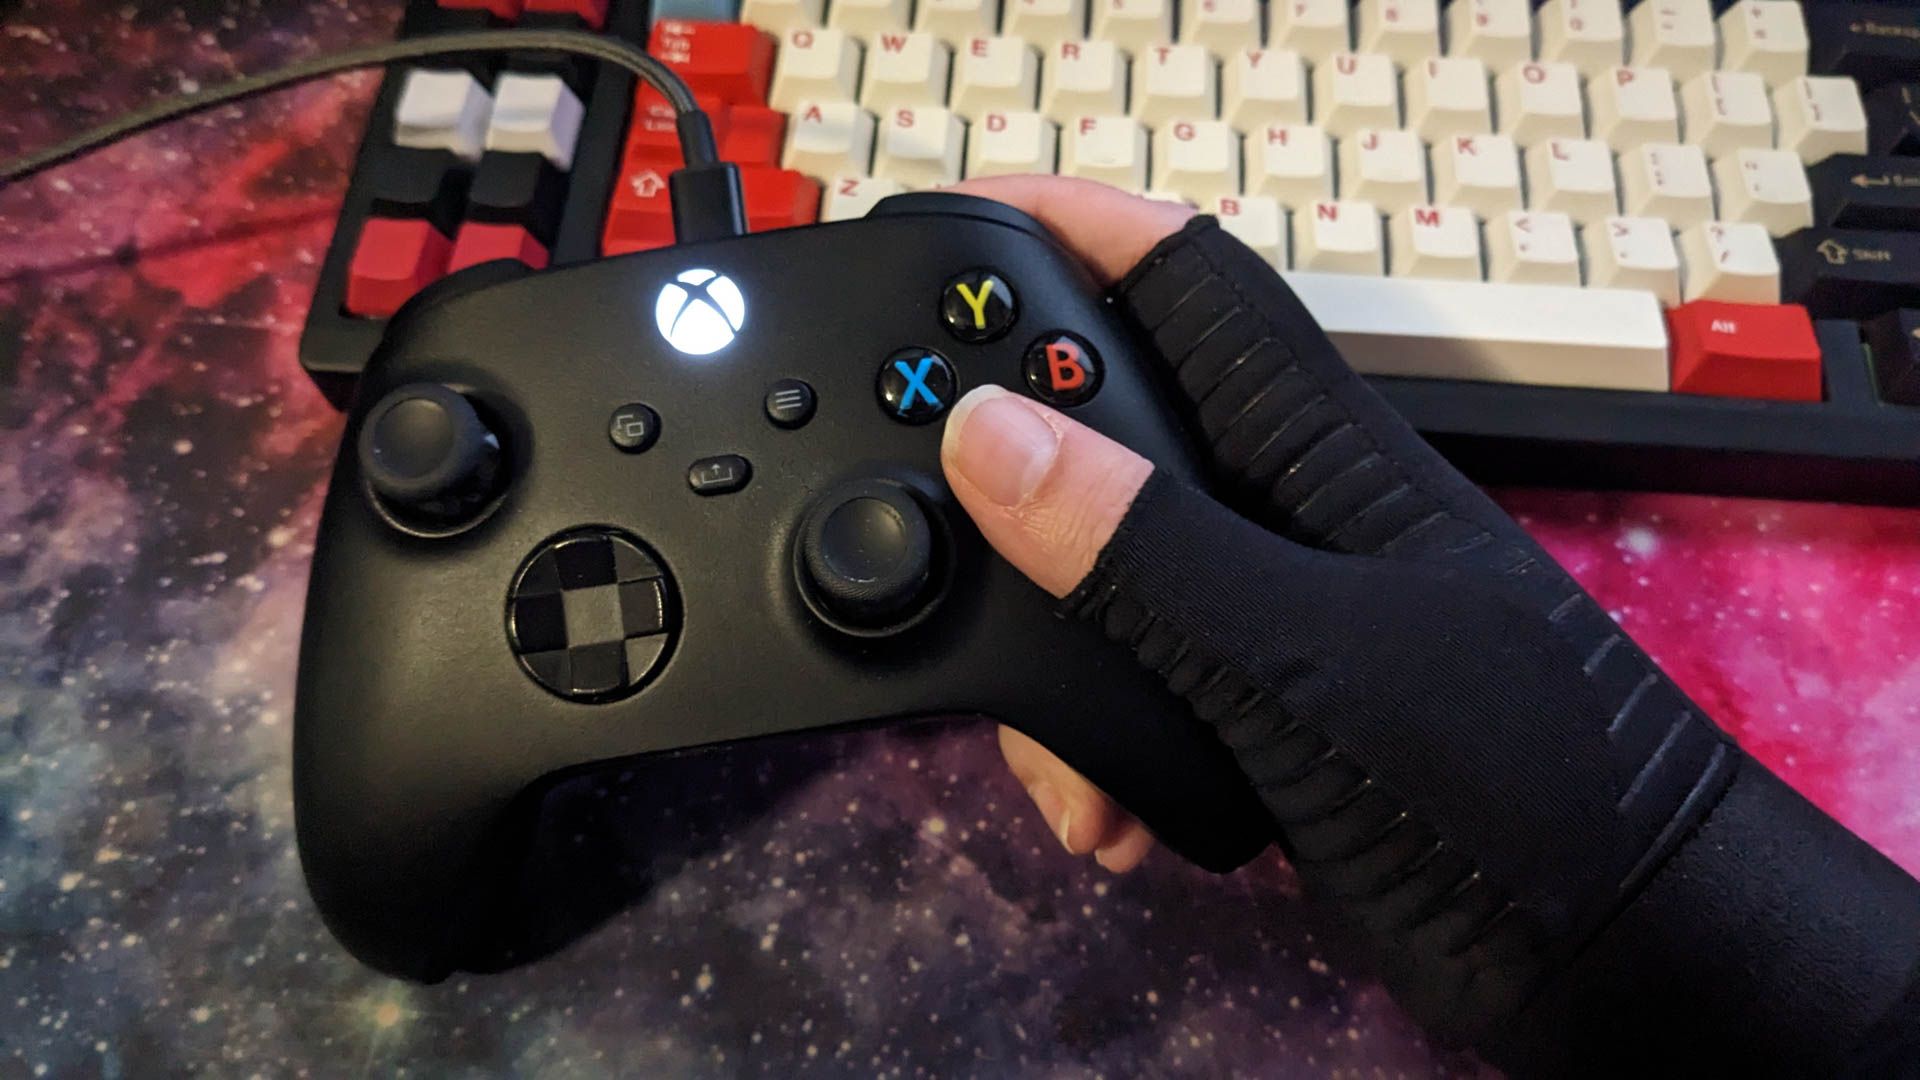 A person wearing gaming gloves and holding an Xbox controller.